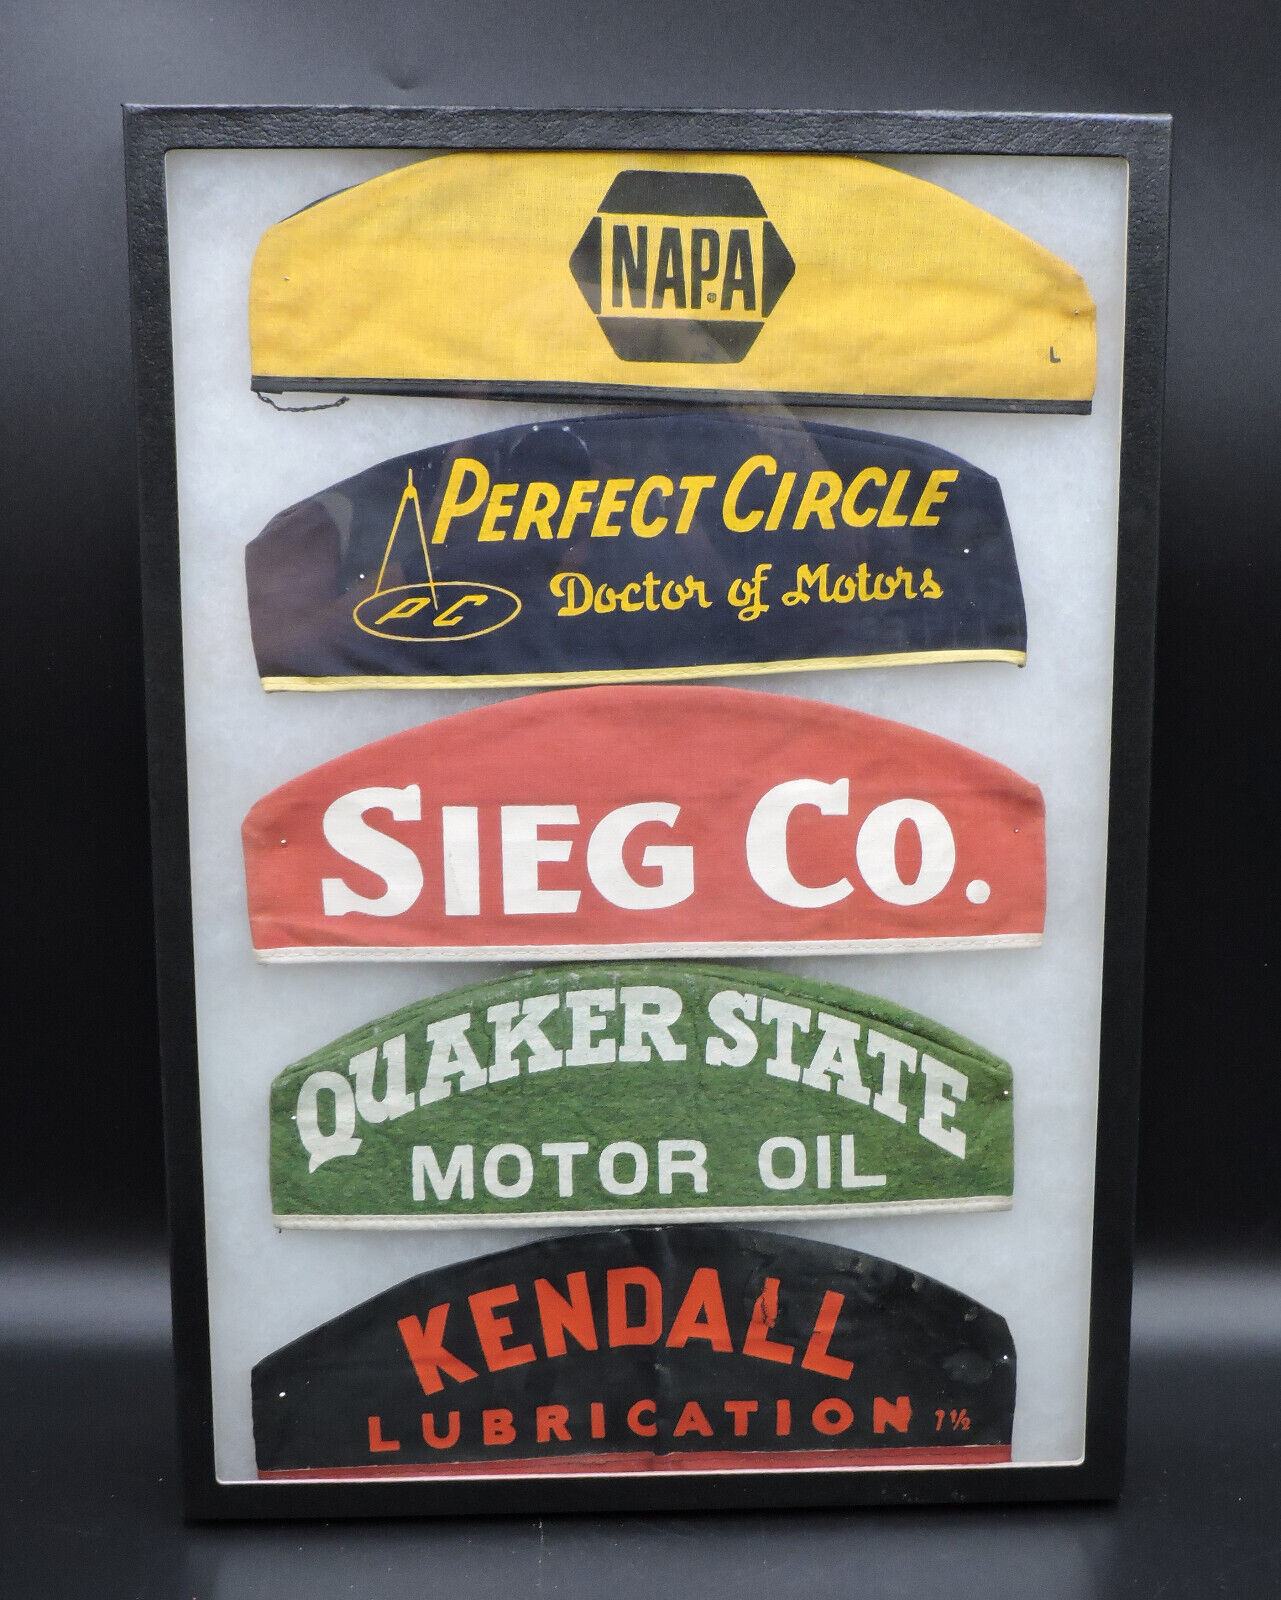 Napa, Perfect Circle, Sieg Co, Quaker State, And Kendall Vintage Hats In Display